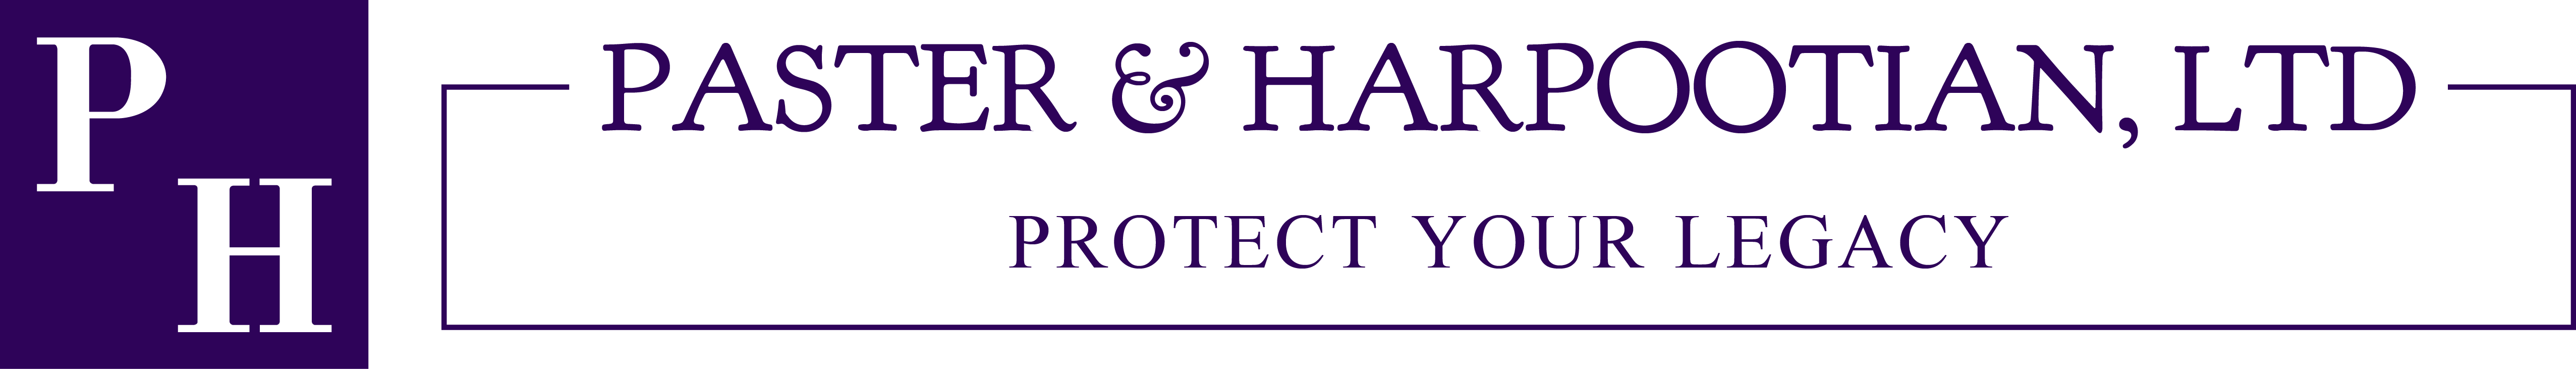 Paster & Harpootian, Ltd | Protect Your Legacy